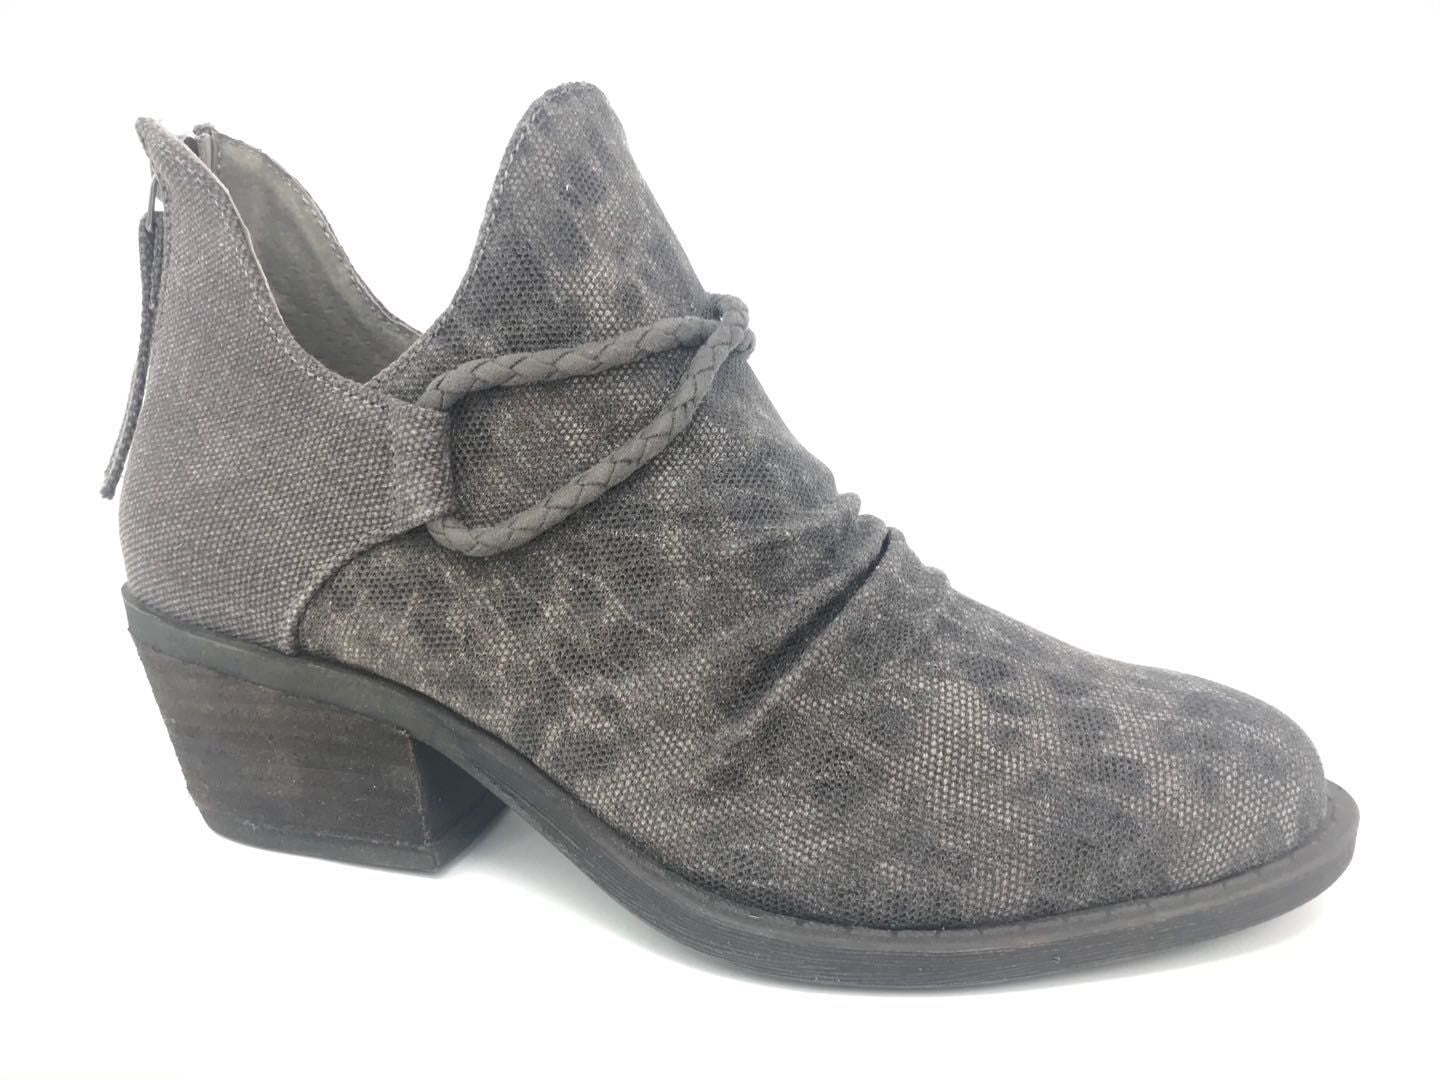 The Spartan Charcoal Grey Leopard Bootie